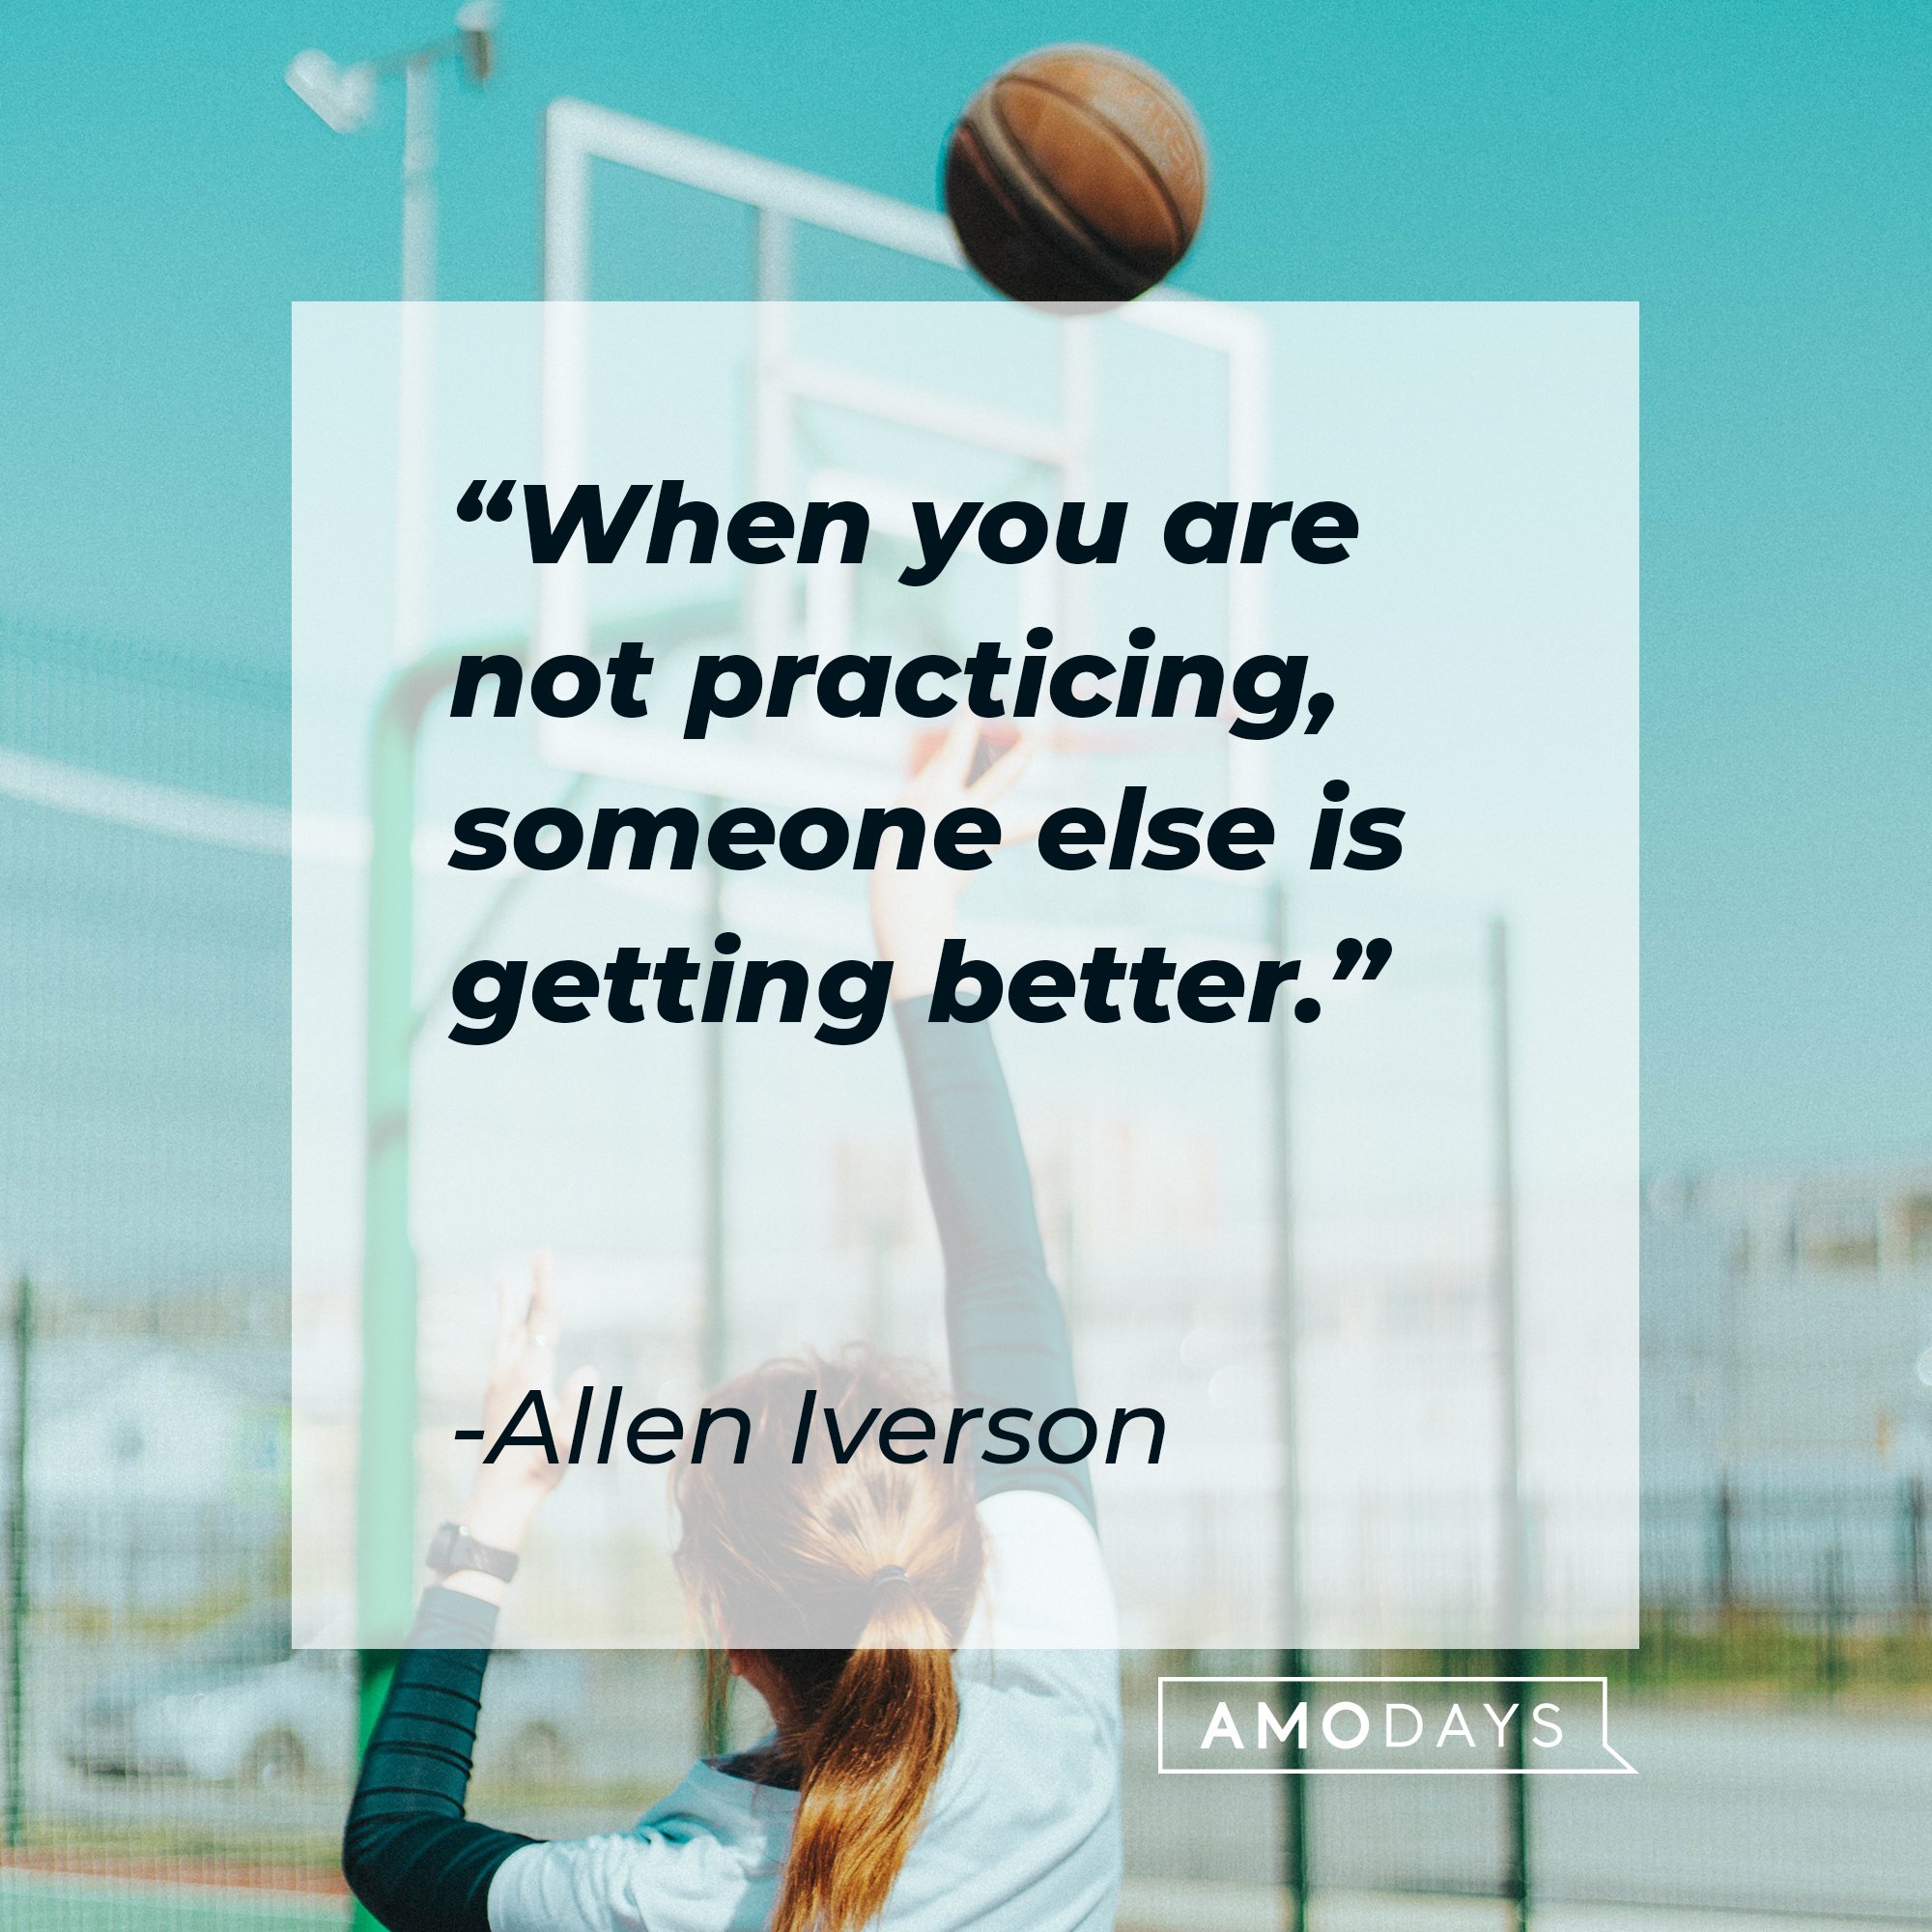 Allen Iverson's quote: "When you are not practicing, someone else is getting better." | Image: AmoDays